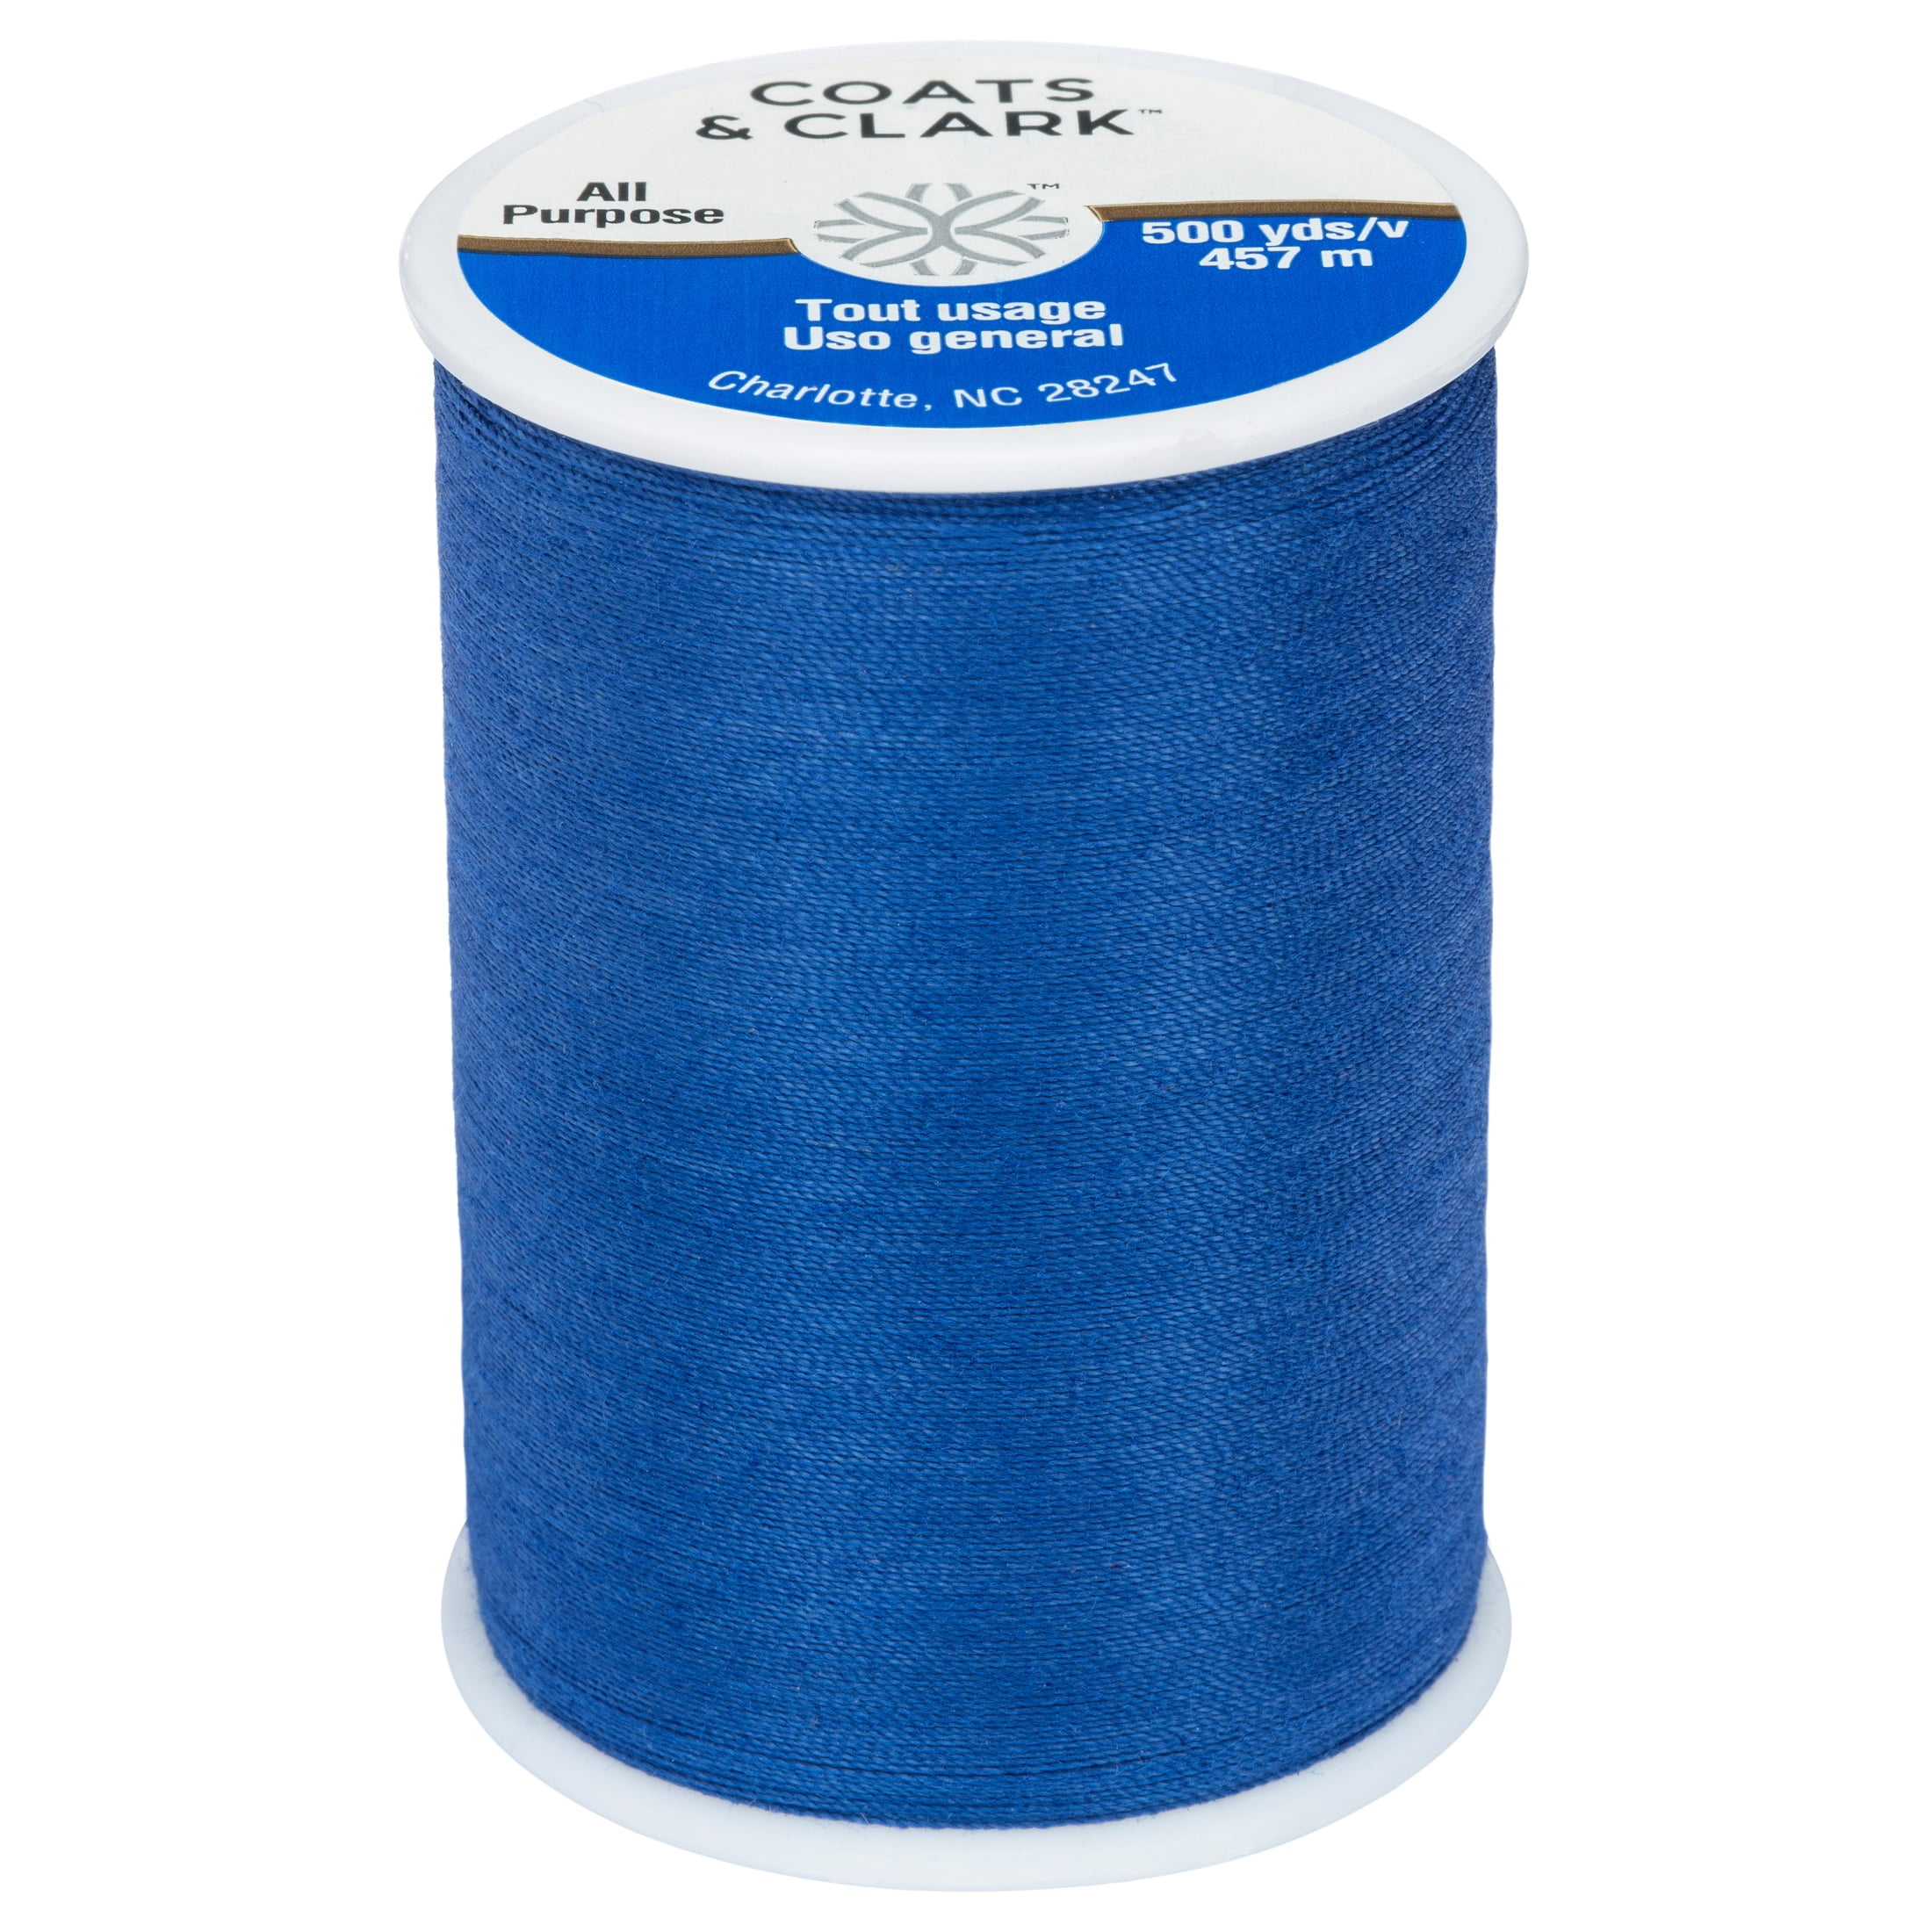 Coats & Clark All Purpose Yale Blue Polyester Thread, 500 yards/457 meters